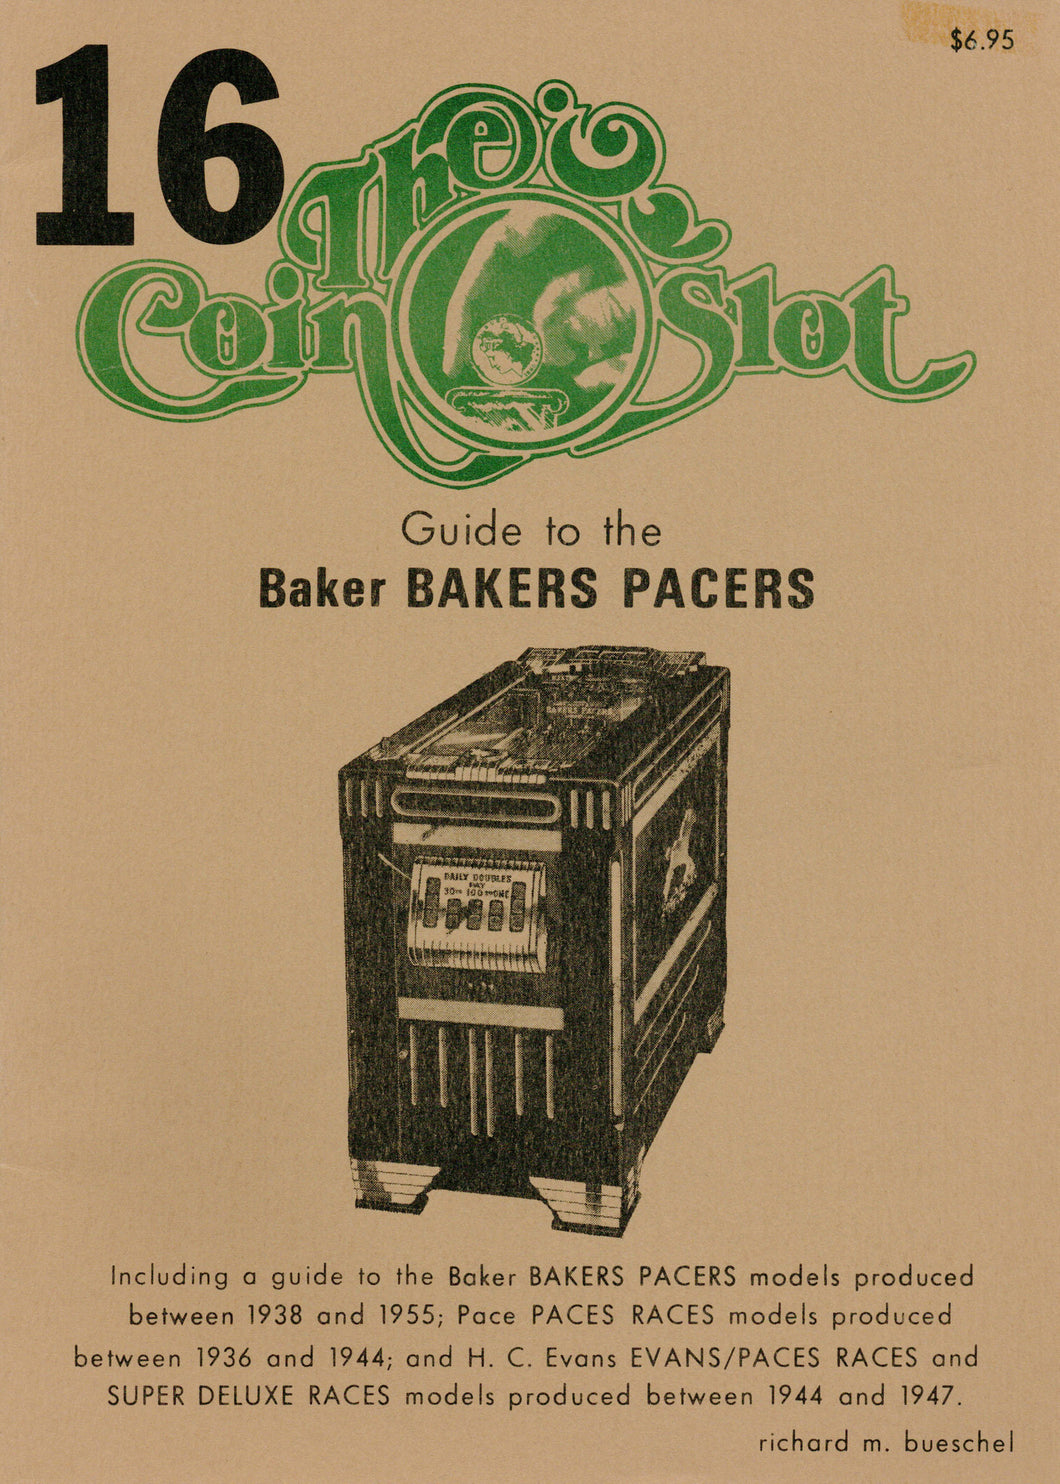 Coin Slot #16. Guide to the Baker Bakers Paces